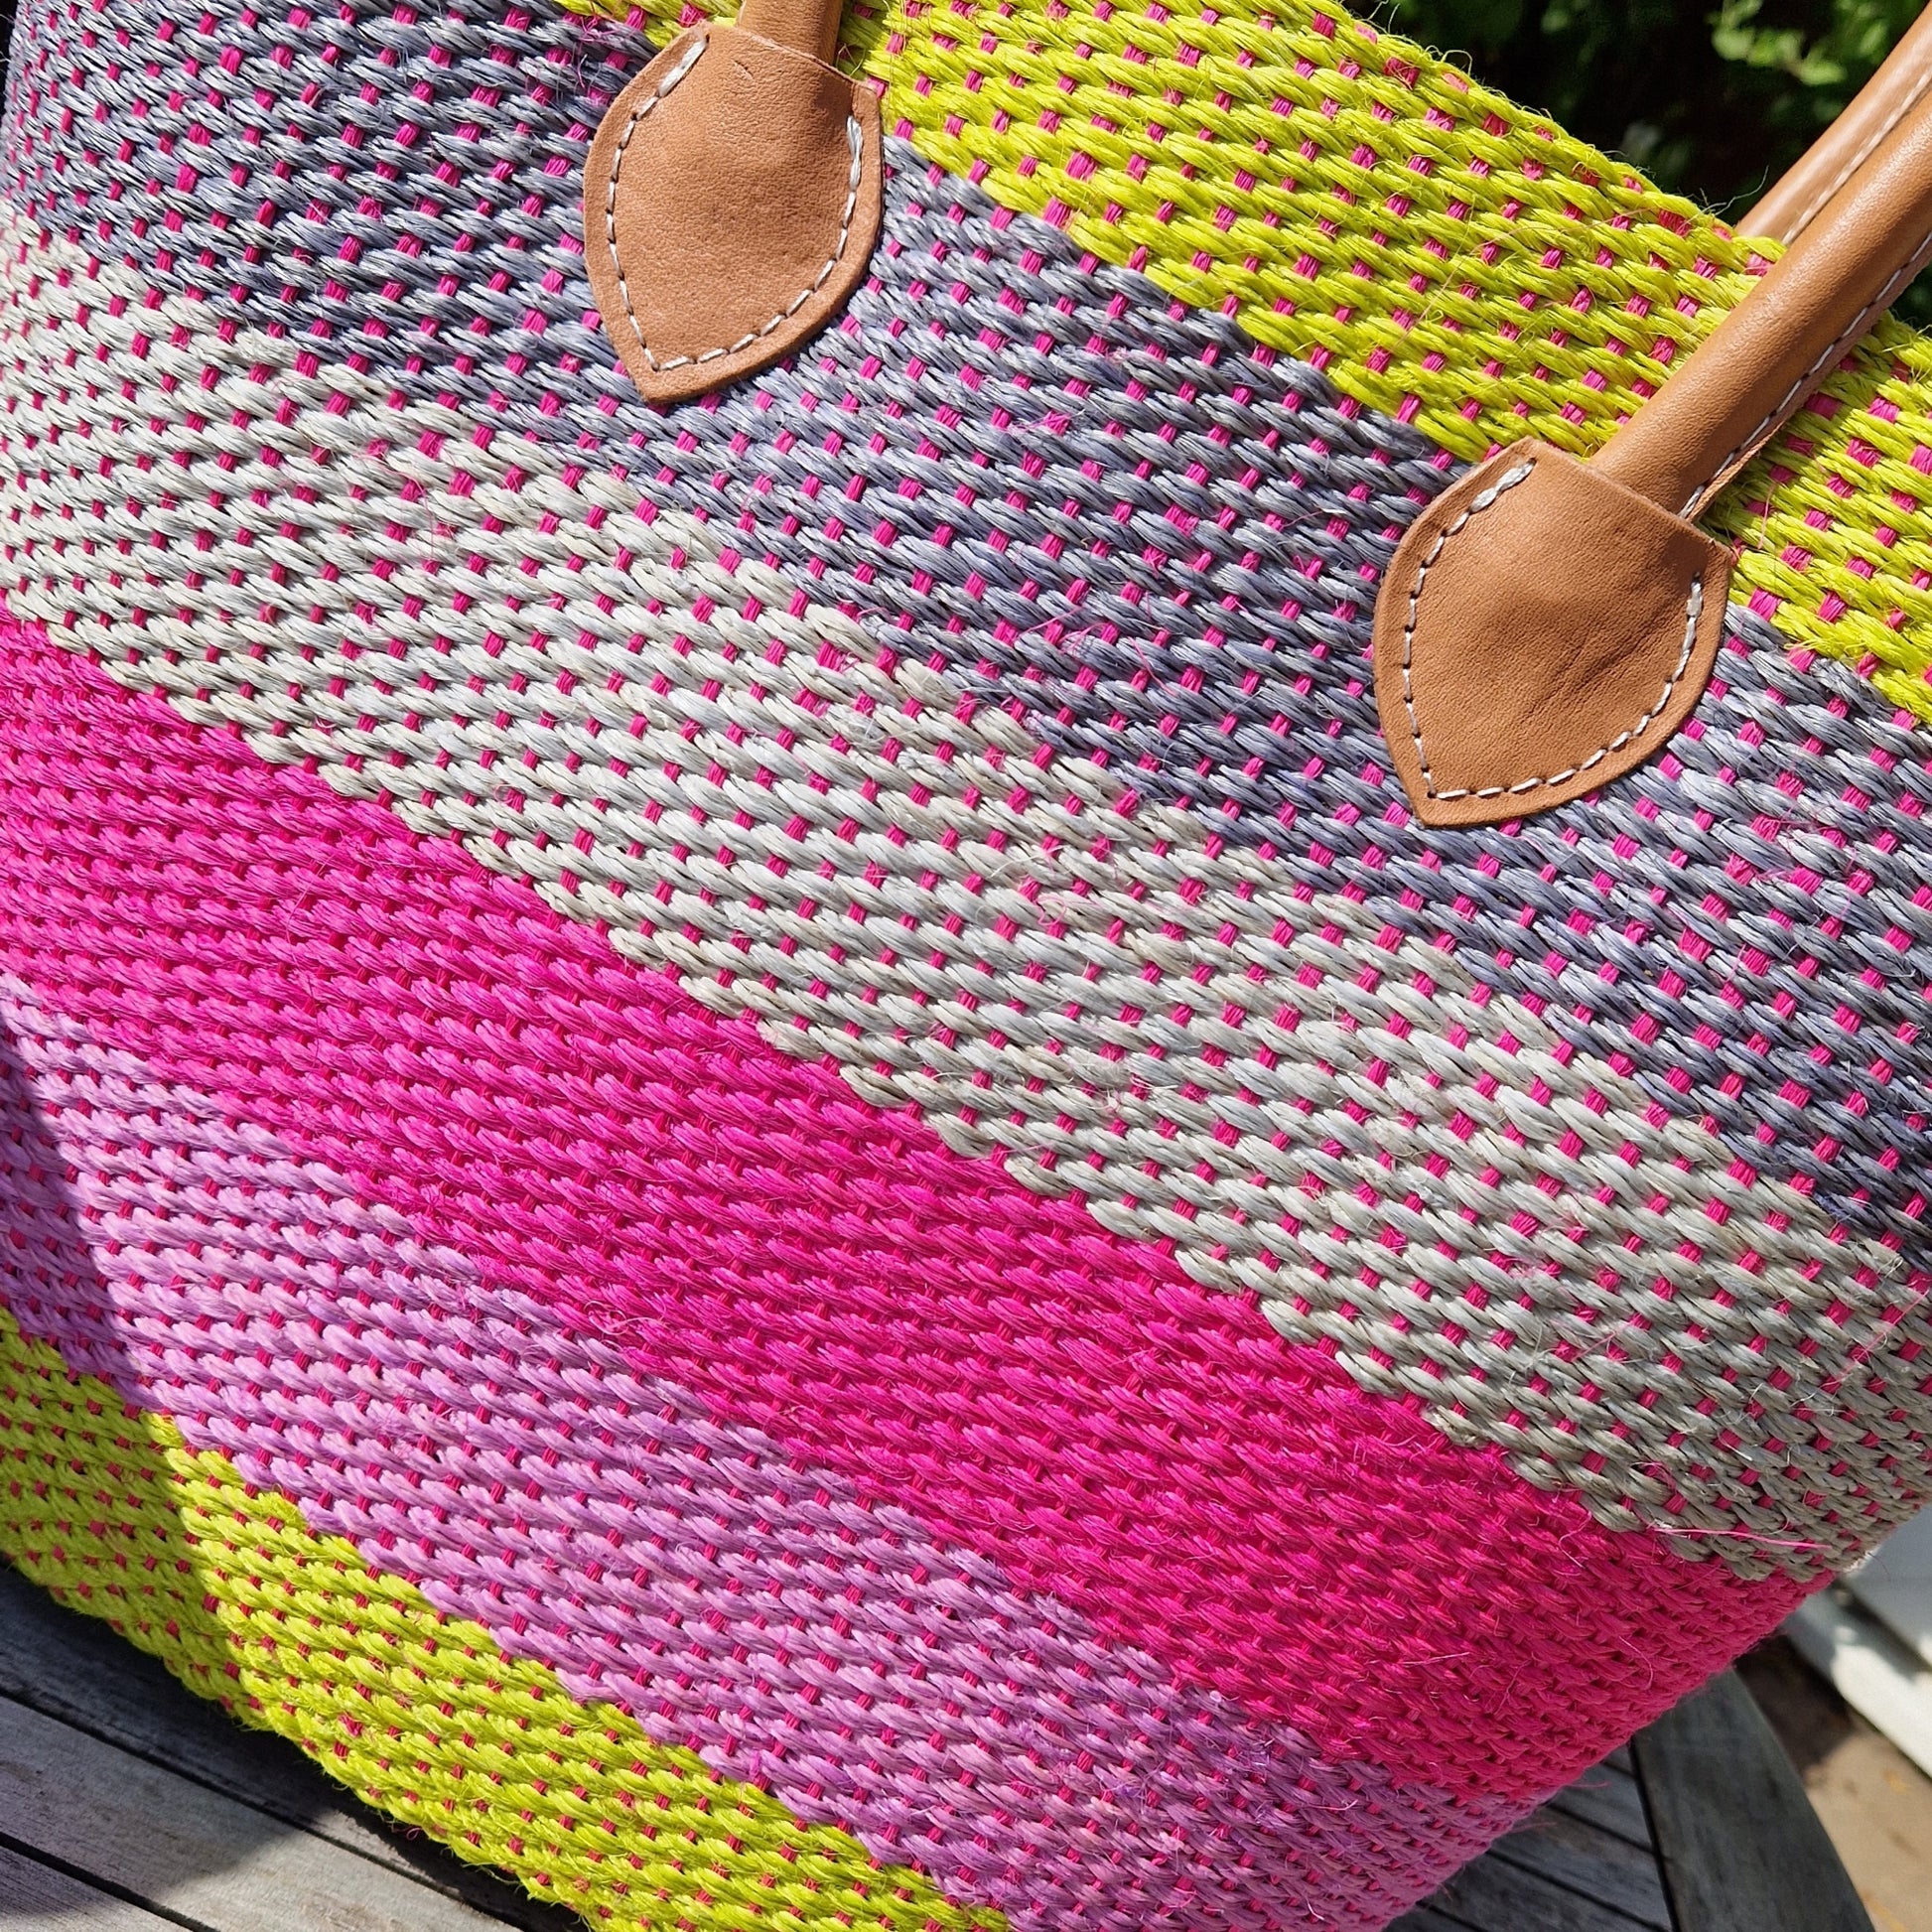 Basket made from Sisal palm decorated in cheerful stripes of pink, lime, lavender and grey